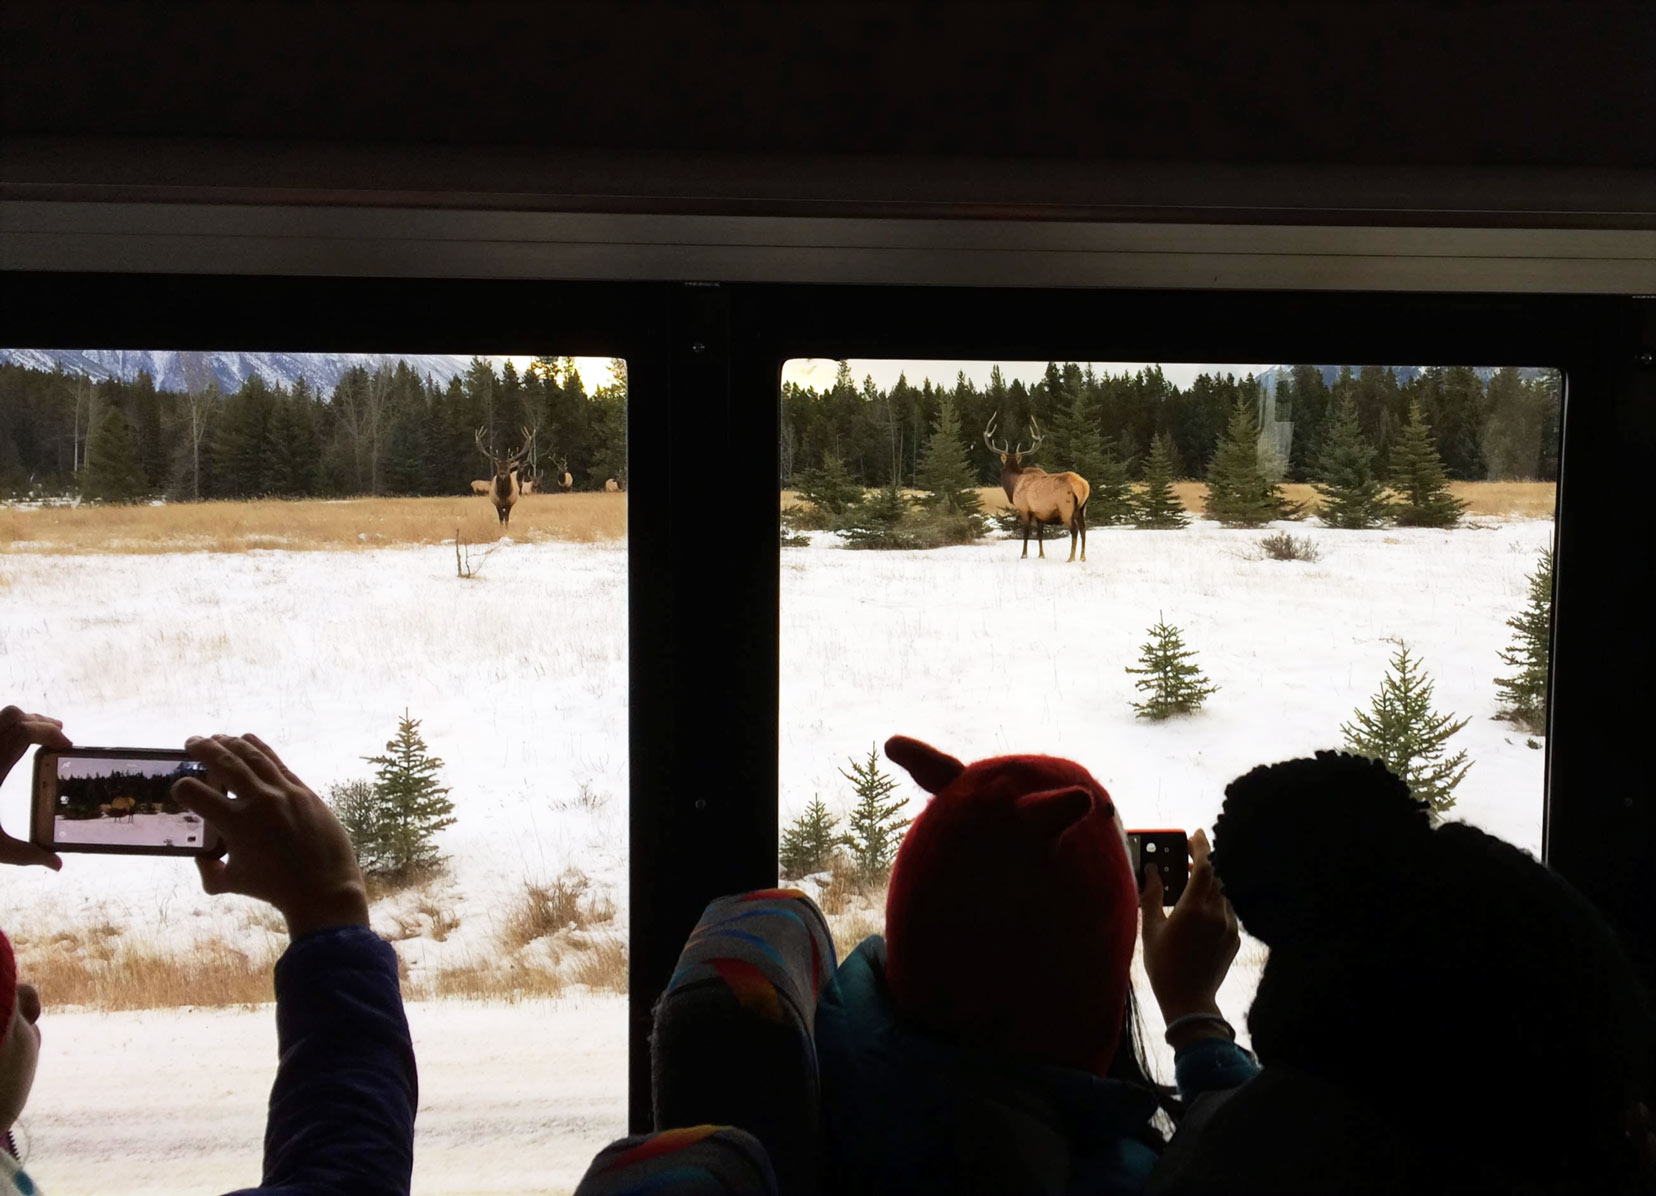 Photos from inside the tour bus looking over the shoulders of other passengers to take a photo of the two elk outside in the snow.